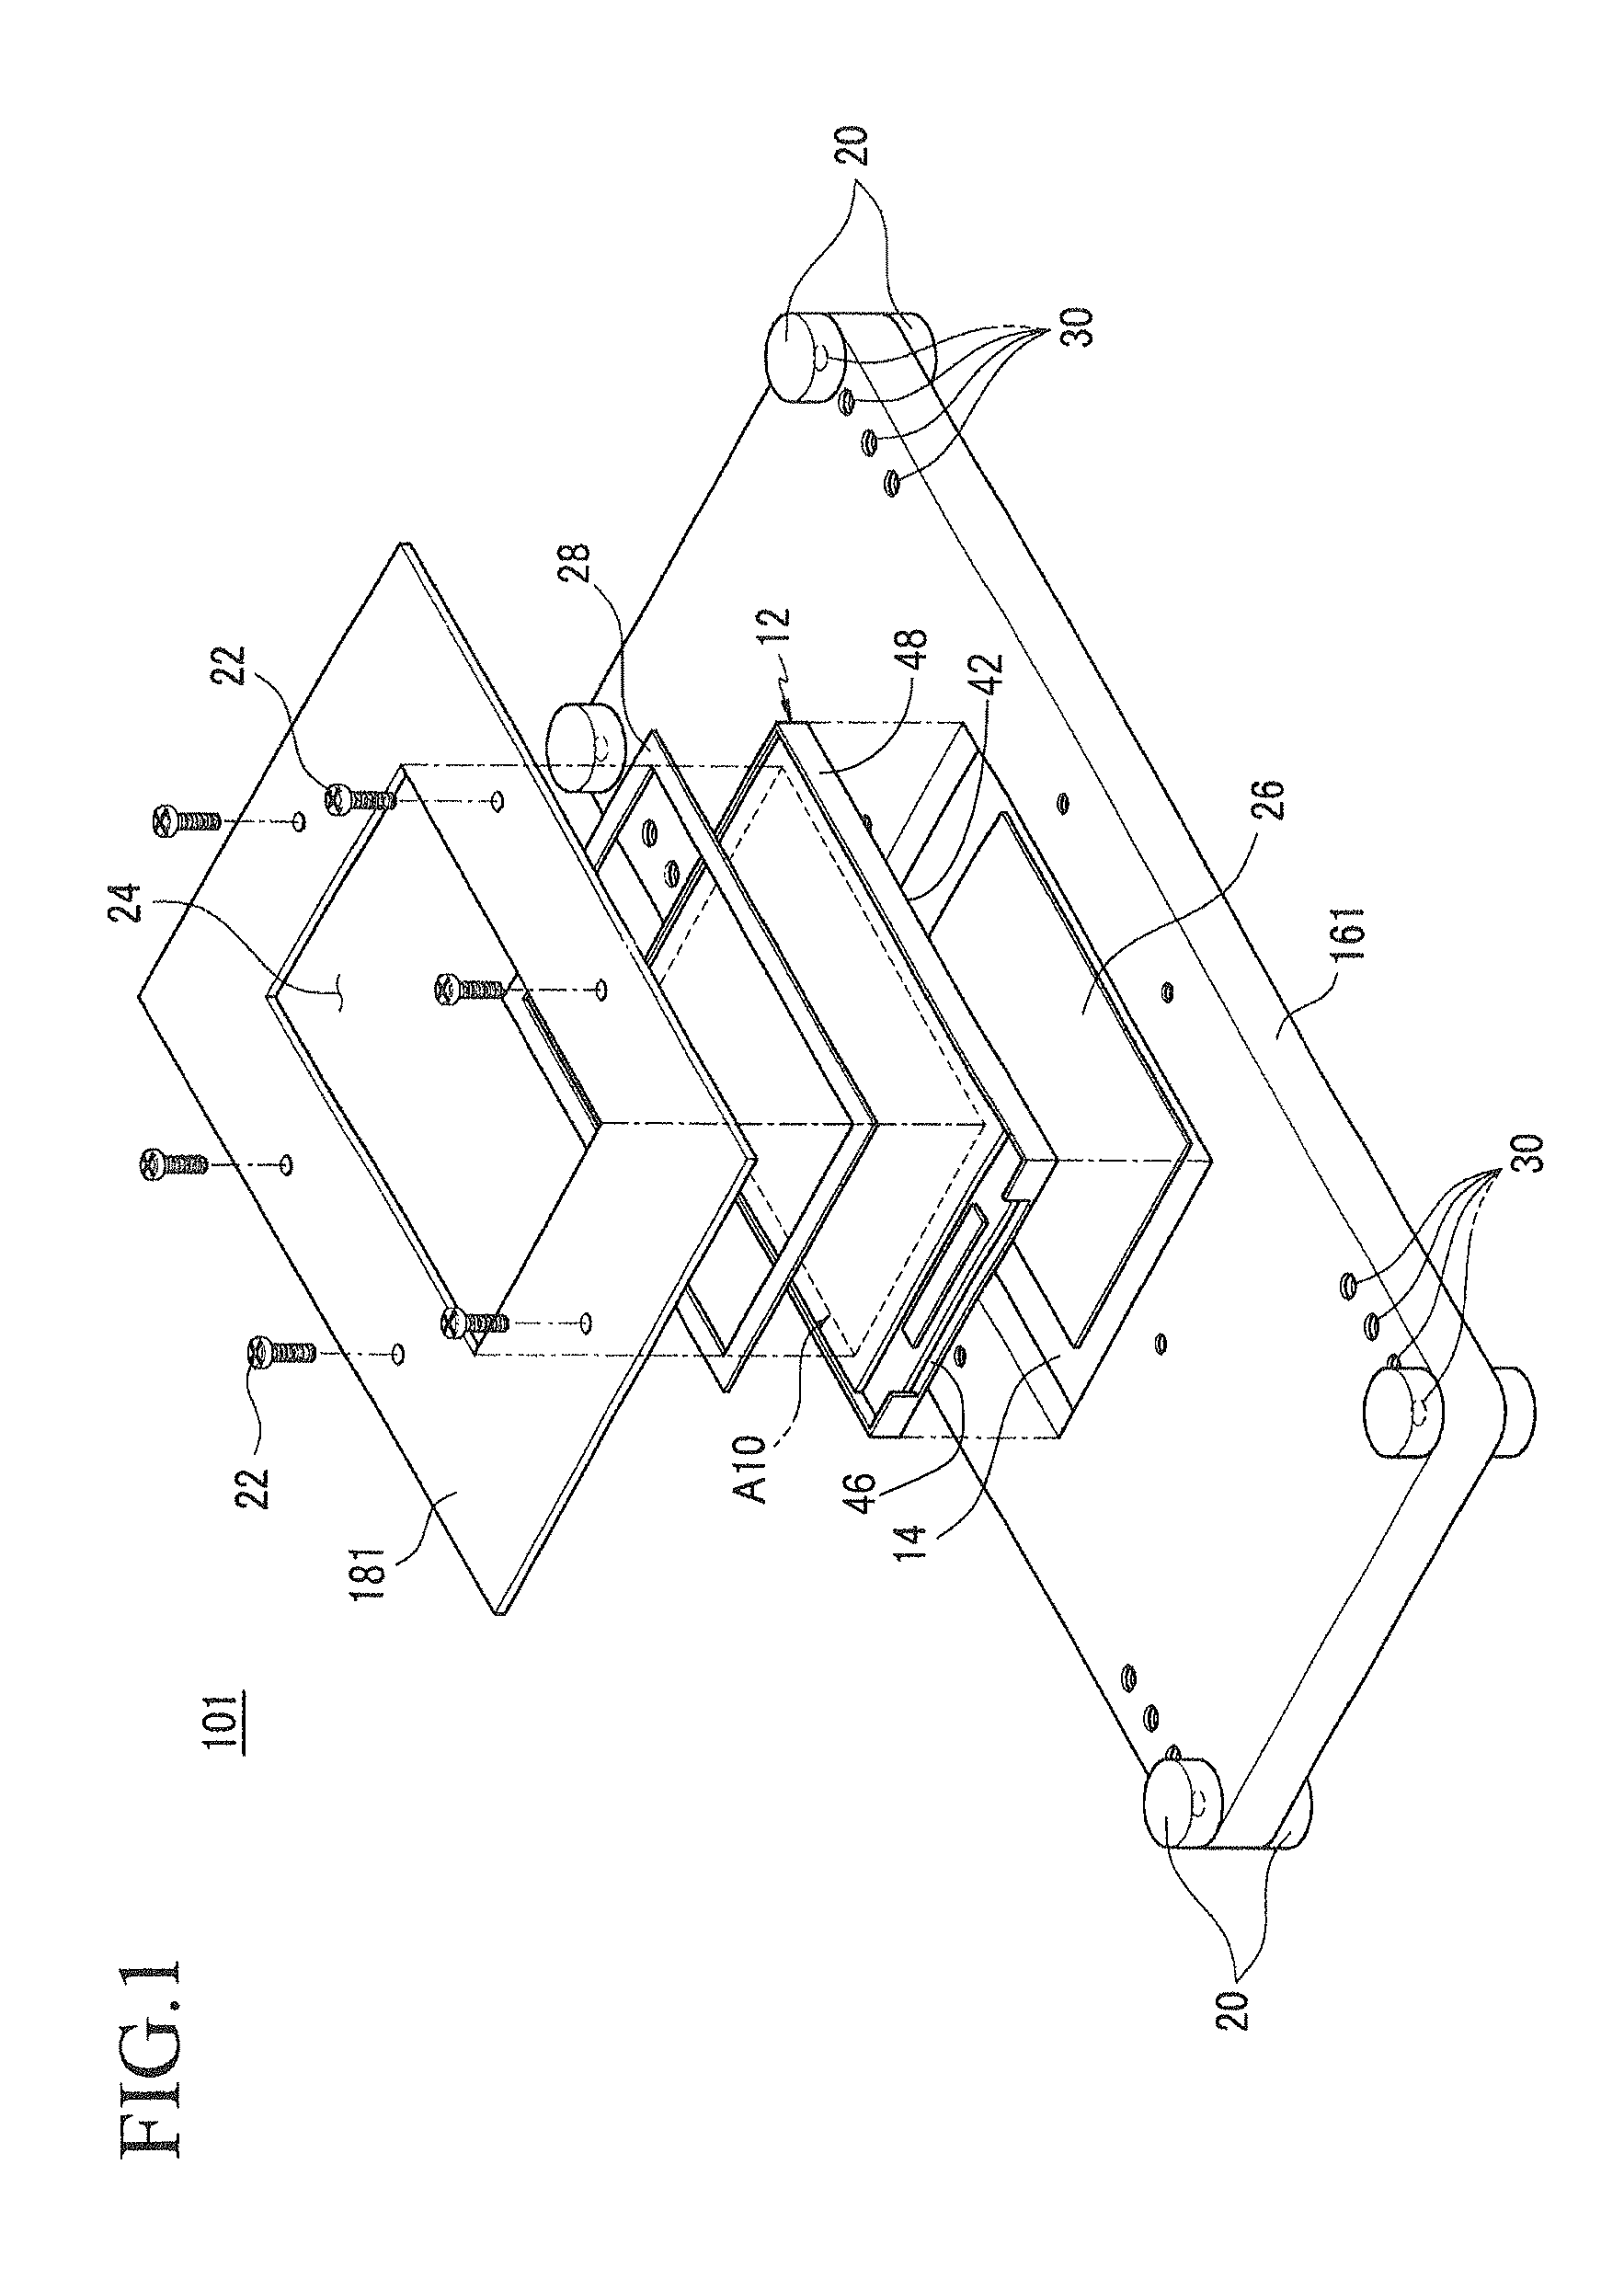 Jig frame for drop test of flat panel display device